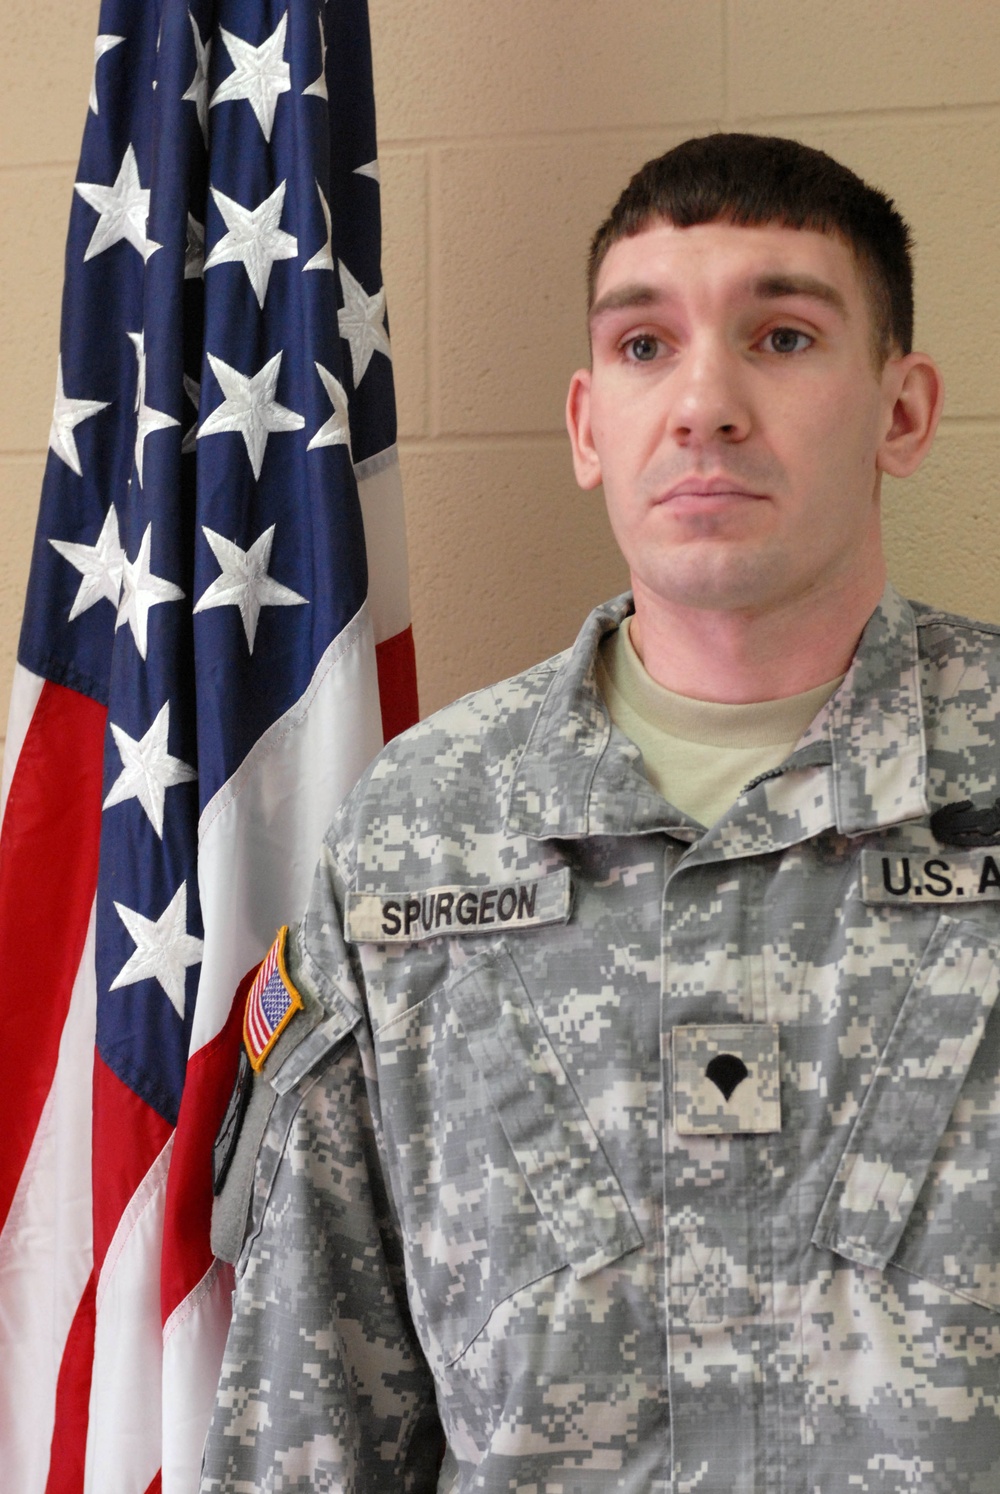 Local Army Reserve Soldier selected for national ceremony